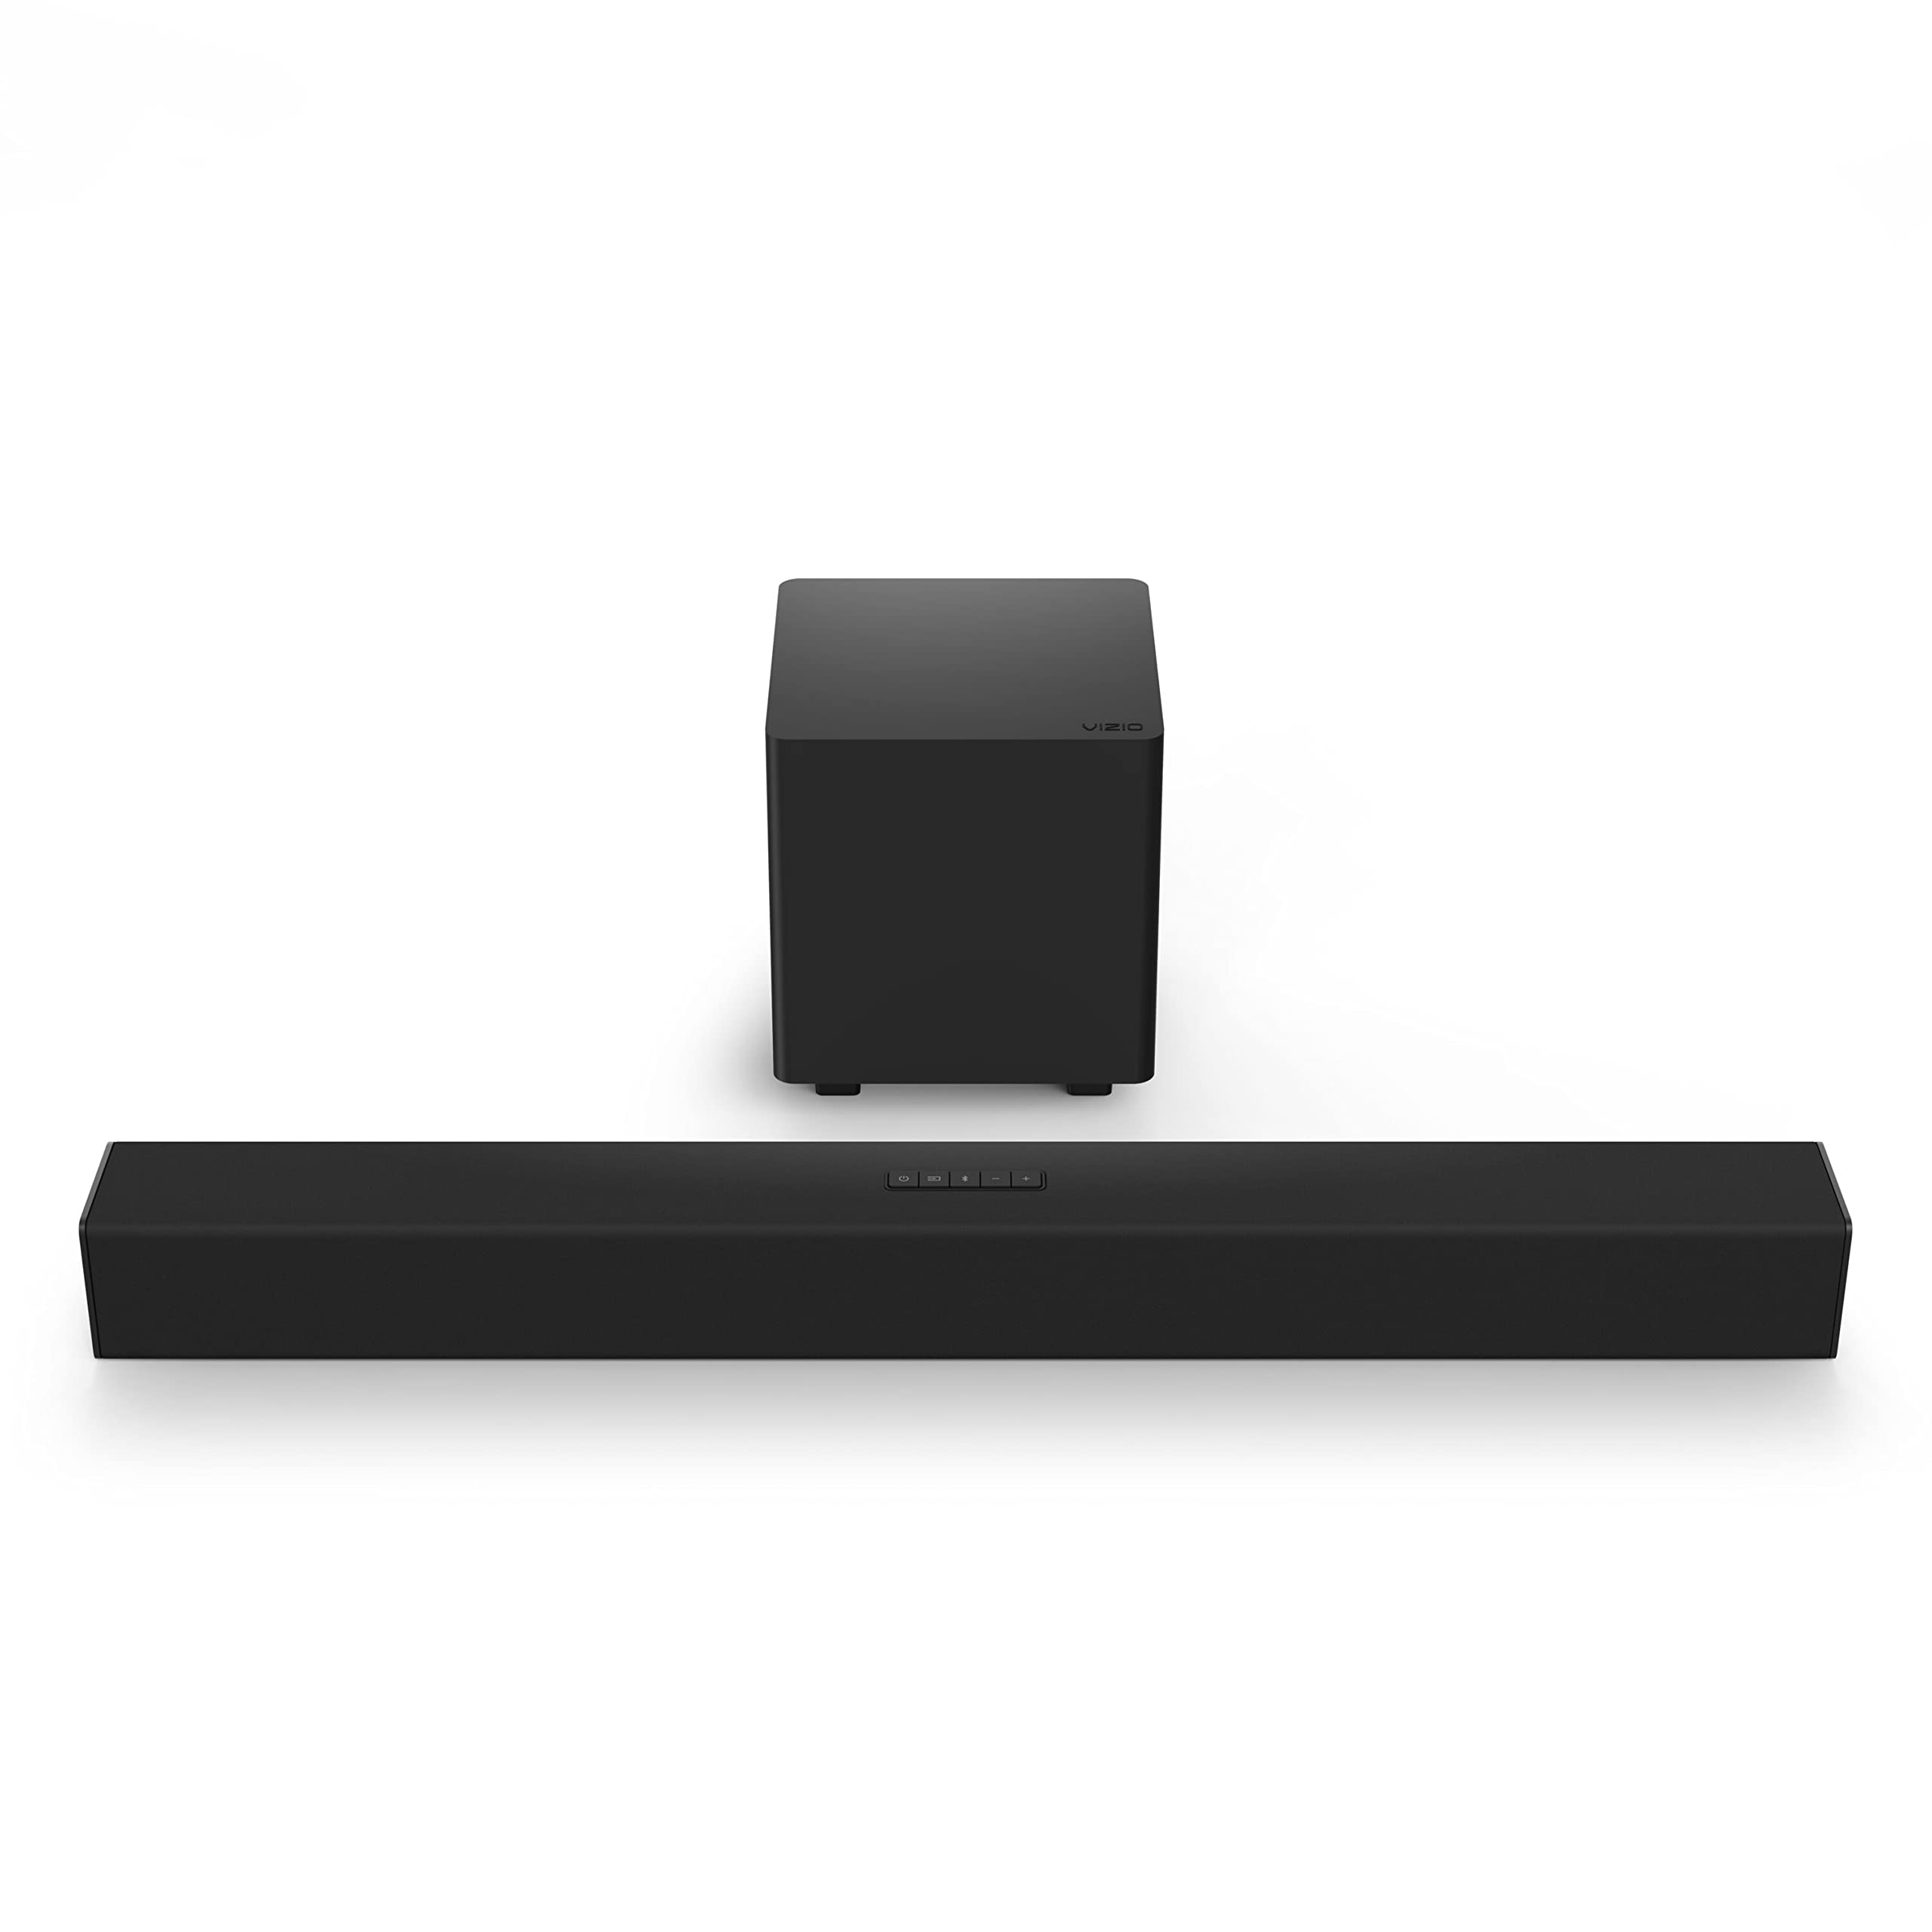 VIZIO 2.1 Home Theater Sound Bar with DTS Virtual:X, Wireless Subwoofer, Bluetooth, Voice Assistant Compatible, Includes Remote Control - SB3221n-J6